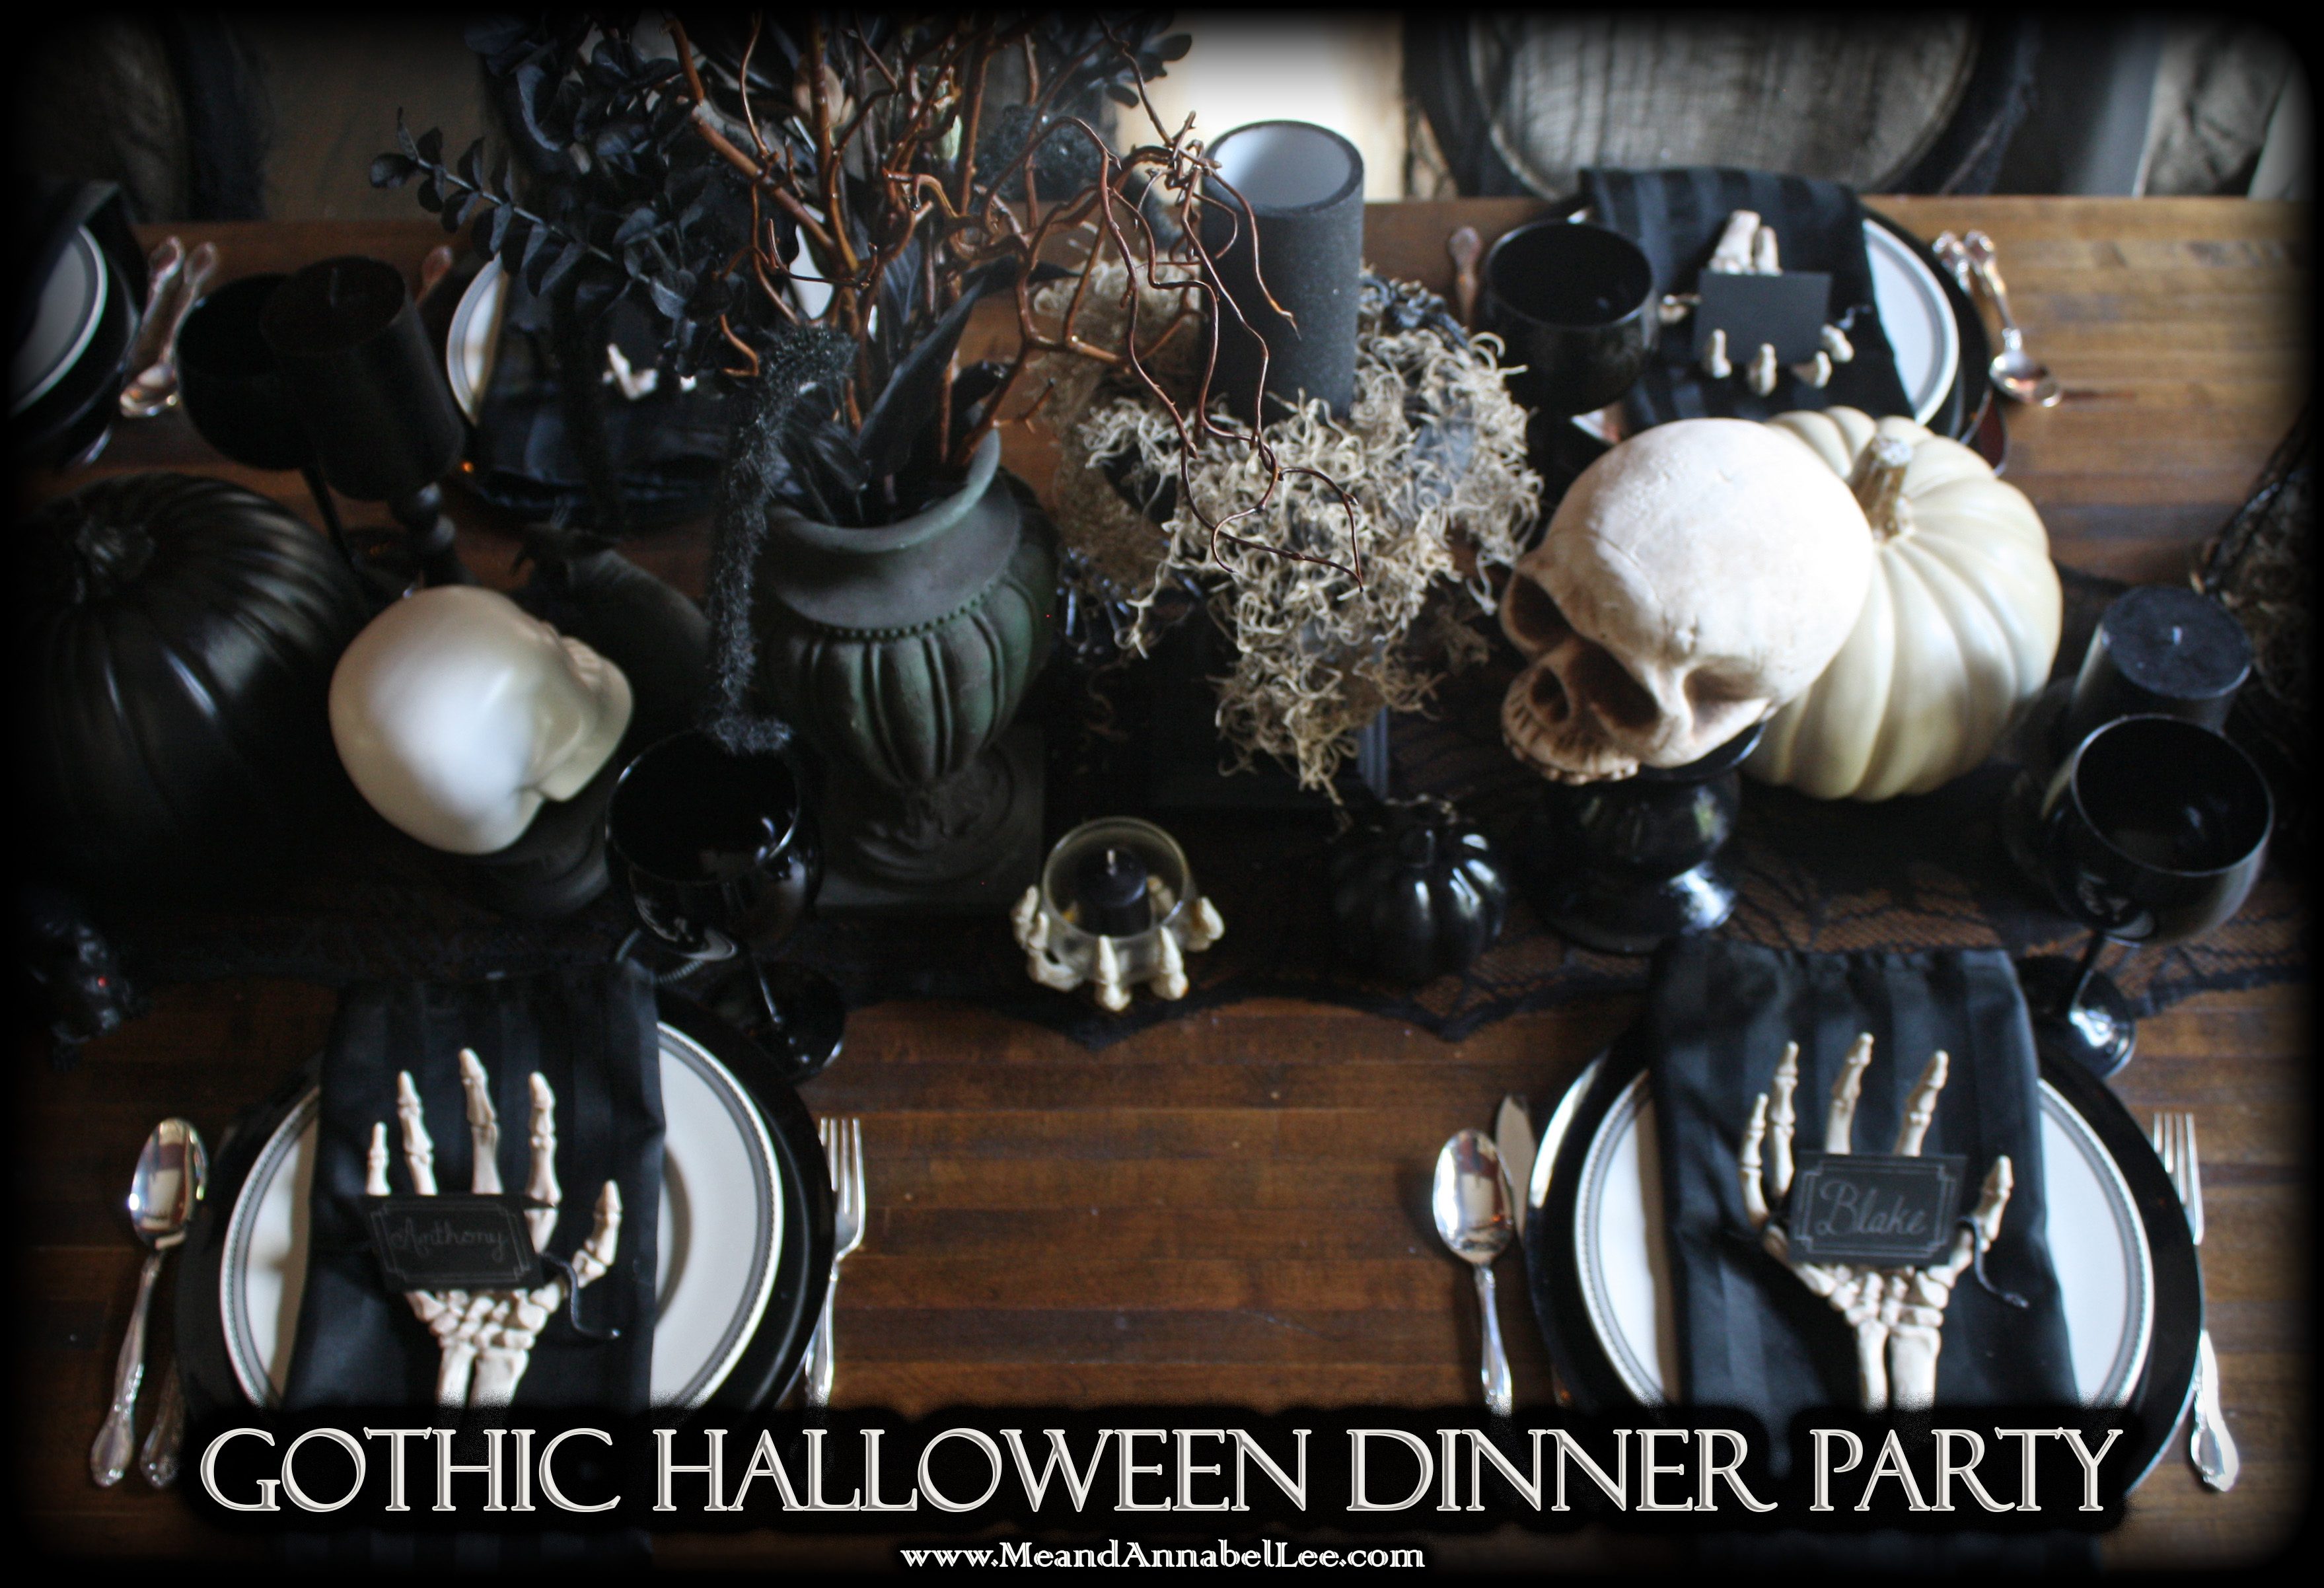 Gothic Halloween Dinner Party | Goth Table | www.MeandAnnabelLee.com